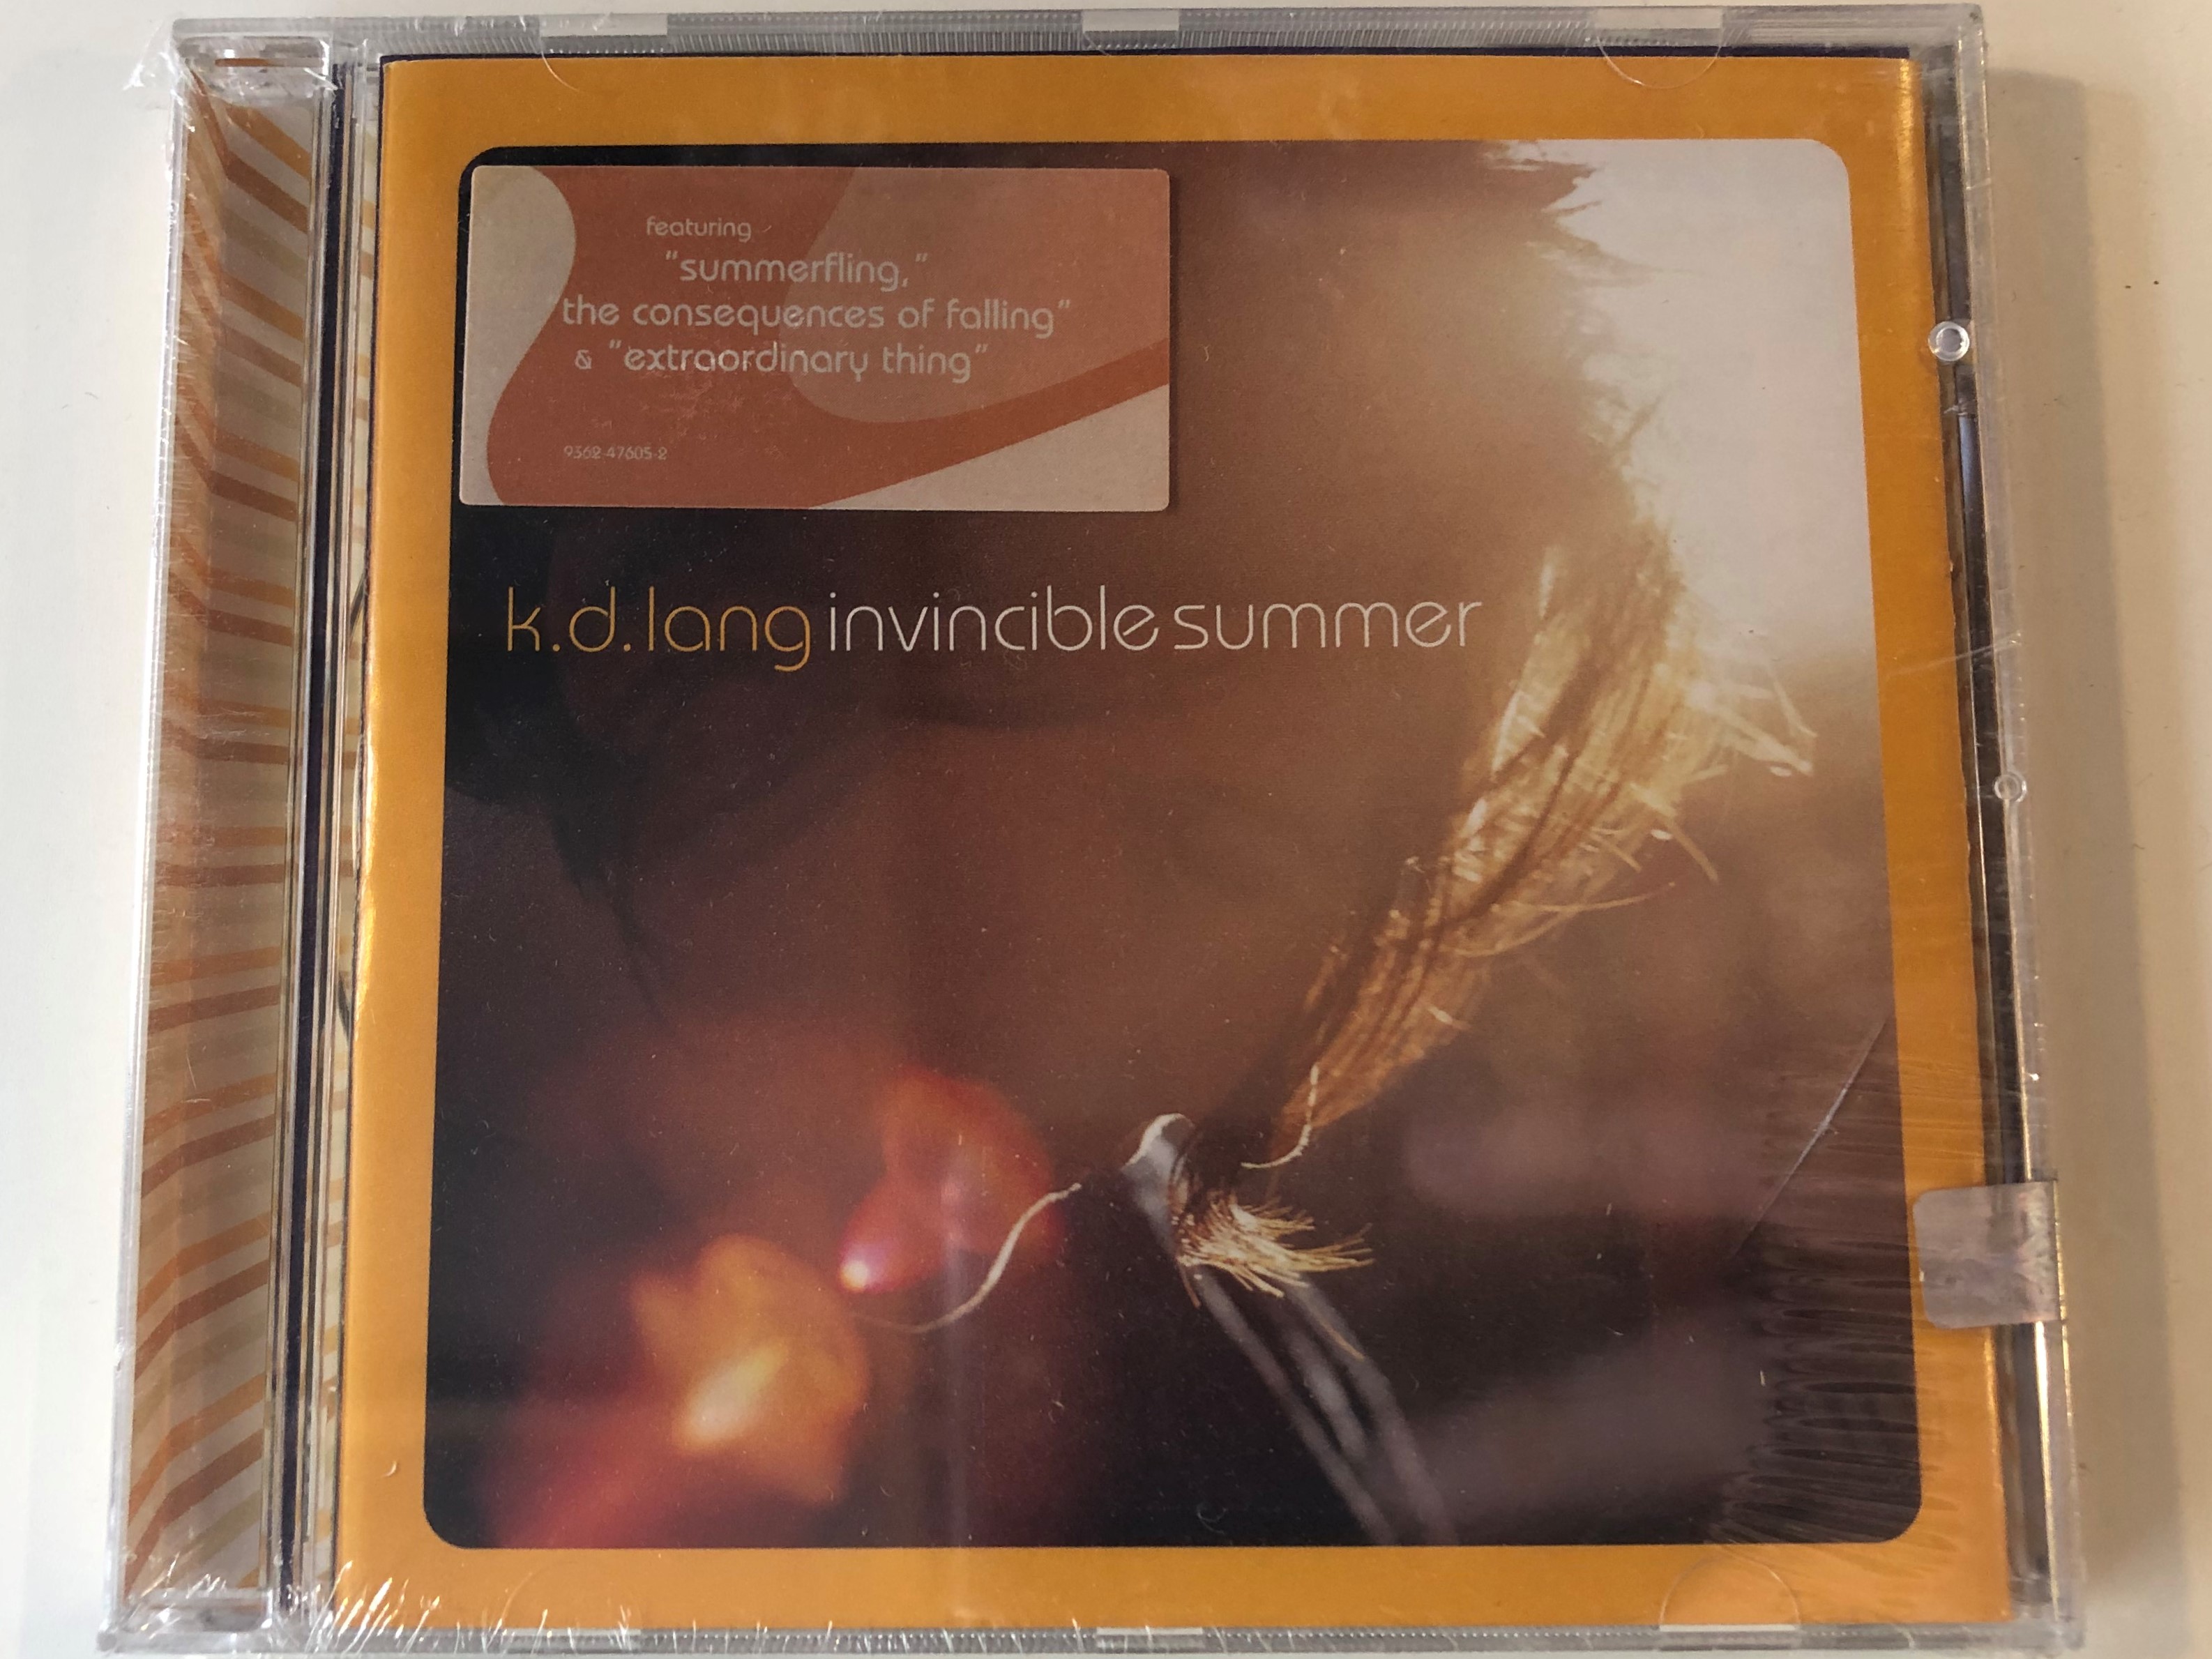 k.d.-lang-invincible-summer-featuring-summerfling-the-consequences-of-falling-extraordinary-thing-warner-bros.-records-audio-cd-2000-9362-47605-2-1-.jpg